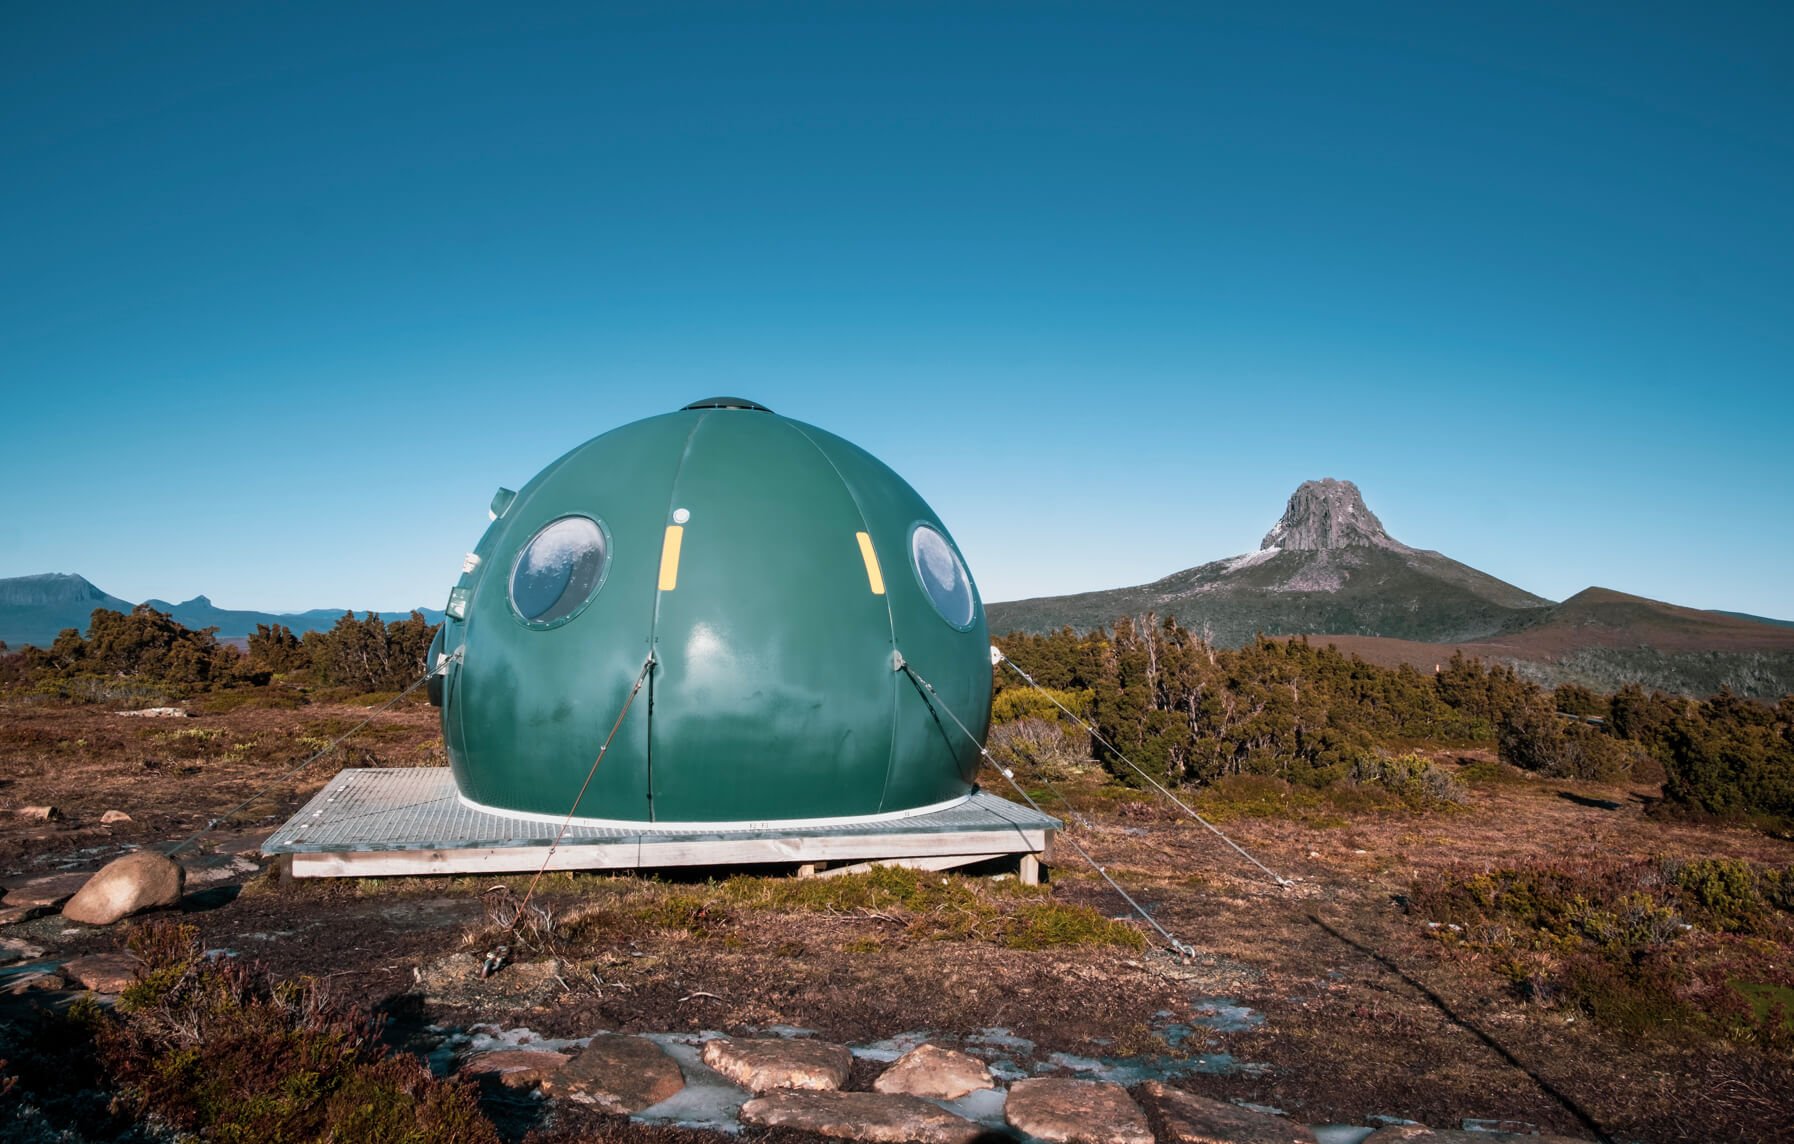 An emergency shelter on the Overland Track in Cradle Mountain-Lake St Clair National Park